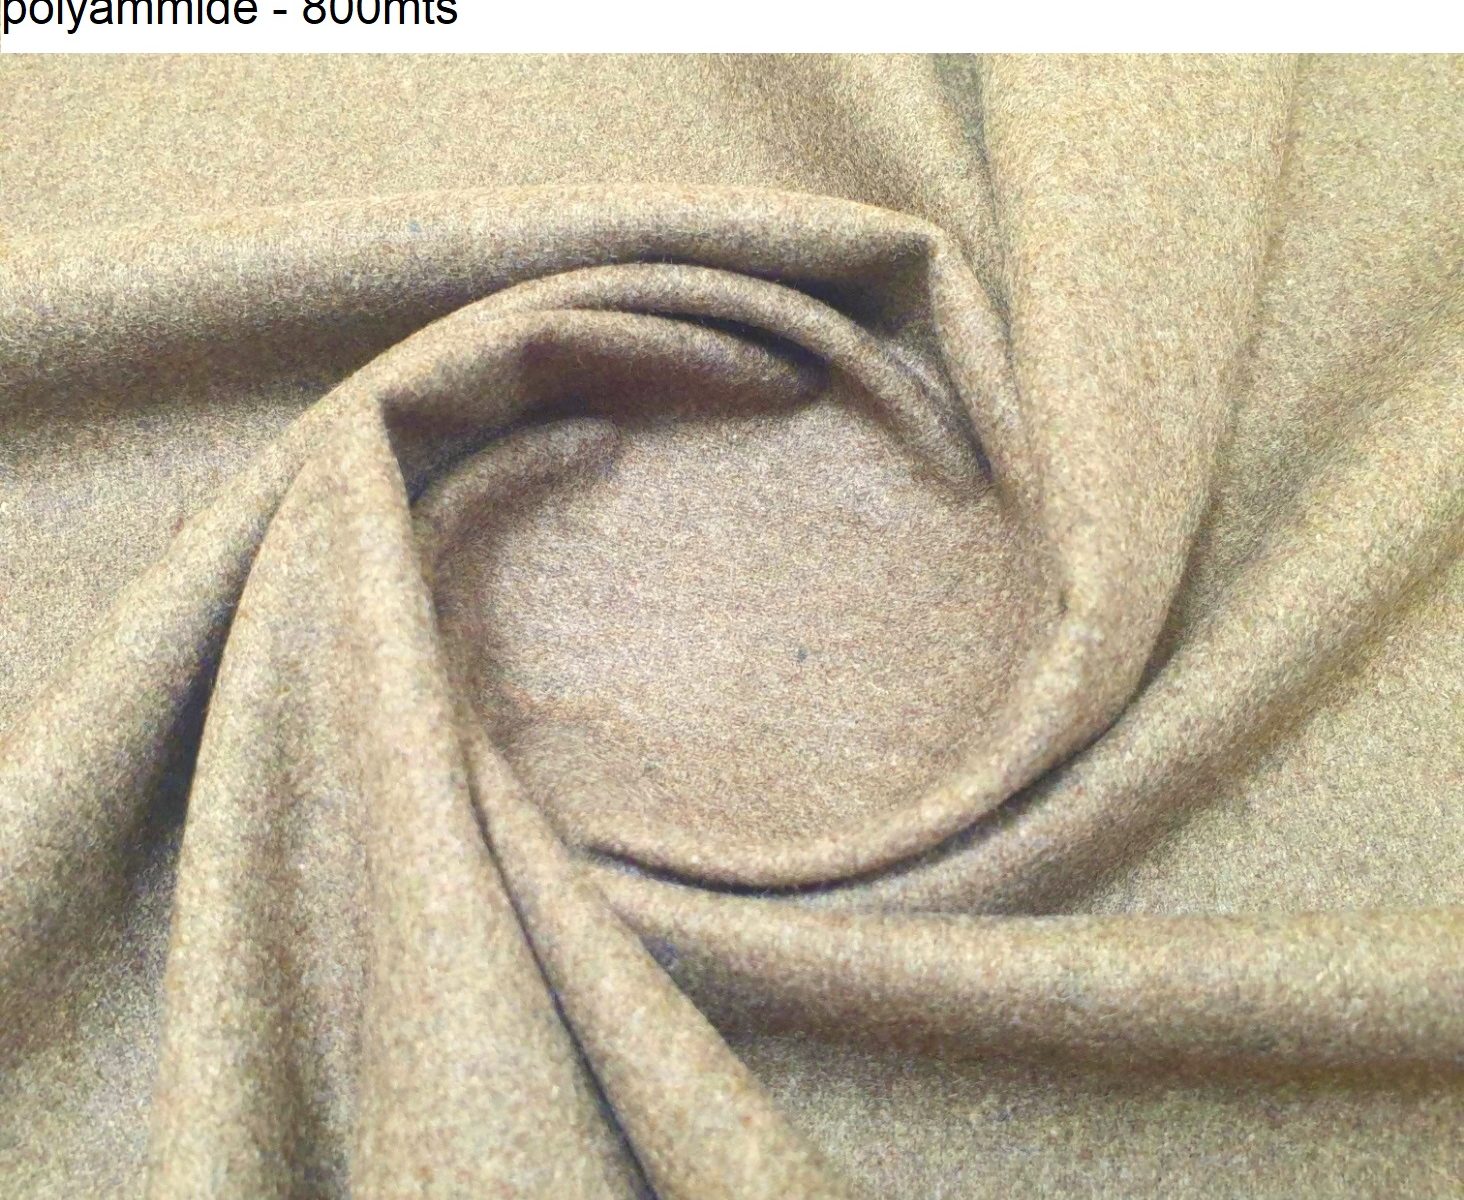 7762 military green wool blend coat fabric WIDTH cm155 WEIGHT gr480 - gr309 square meter - COMPOSITION 62 wool 38 polyammide - 800mts